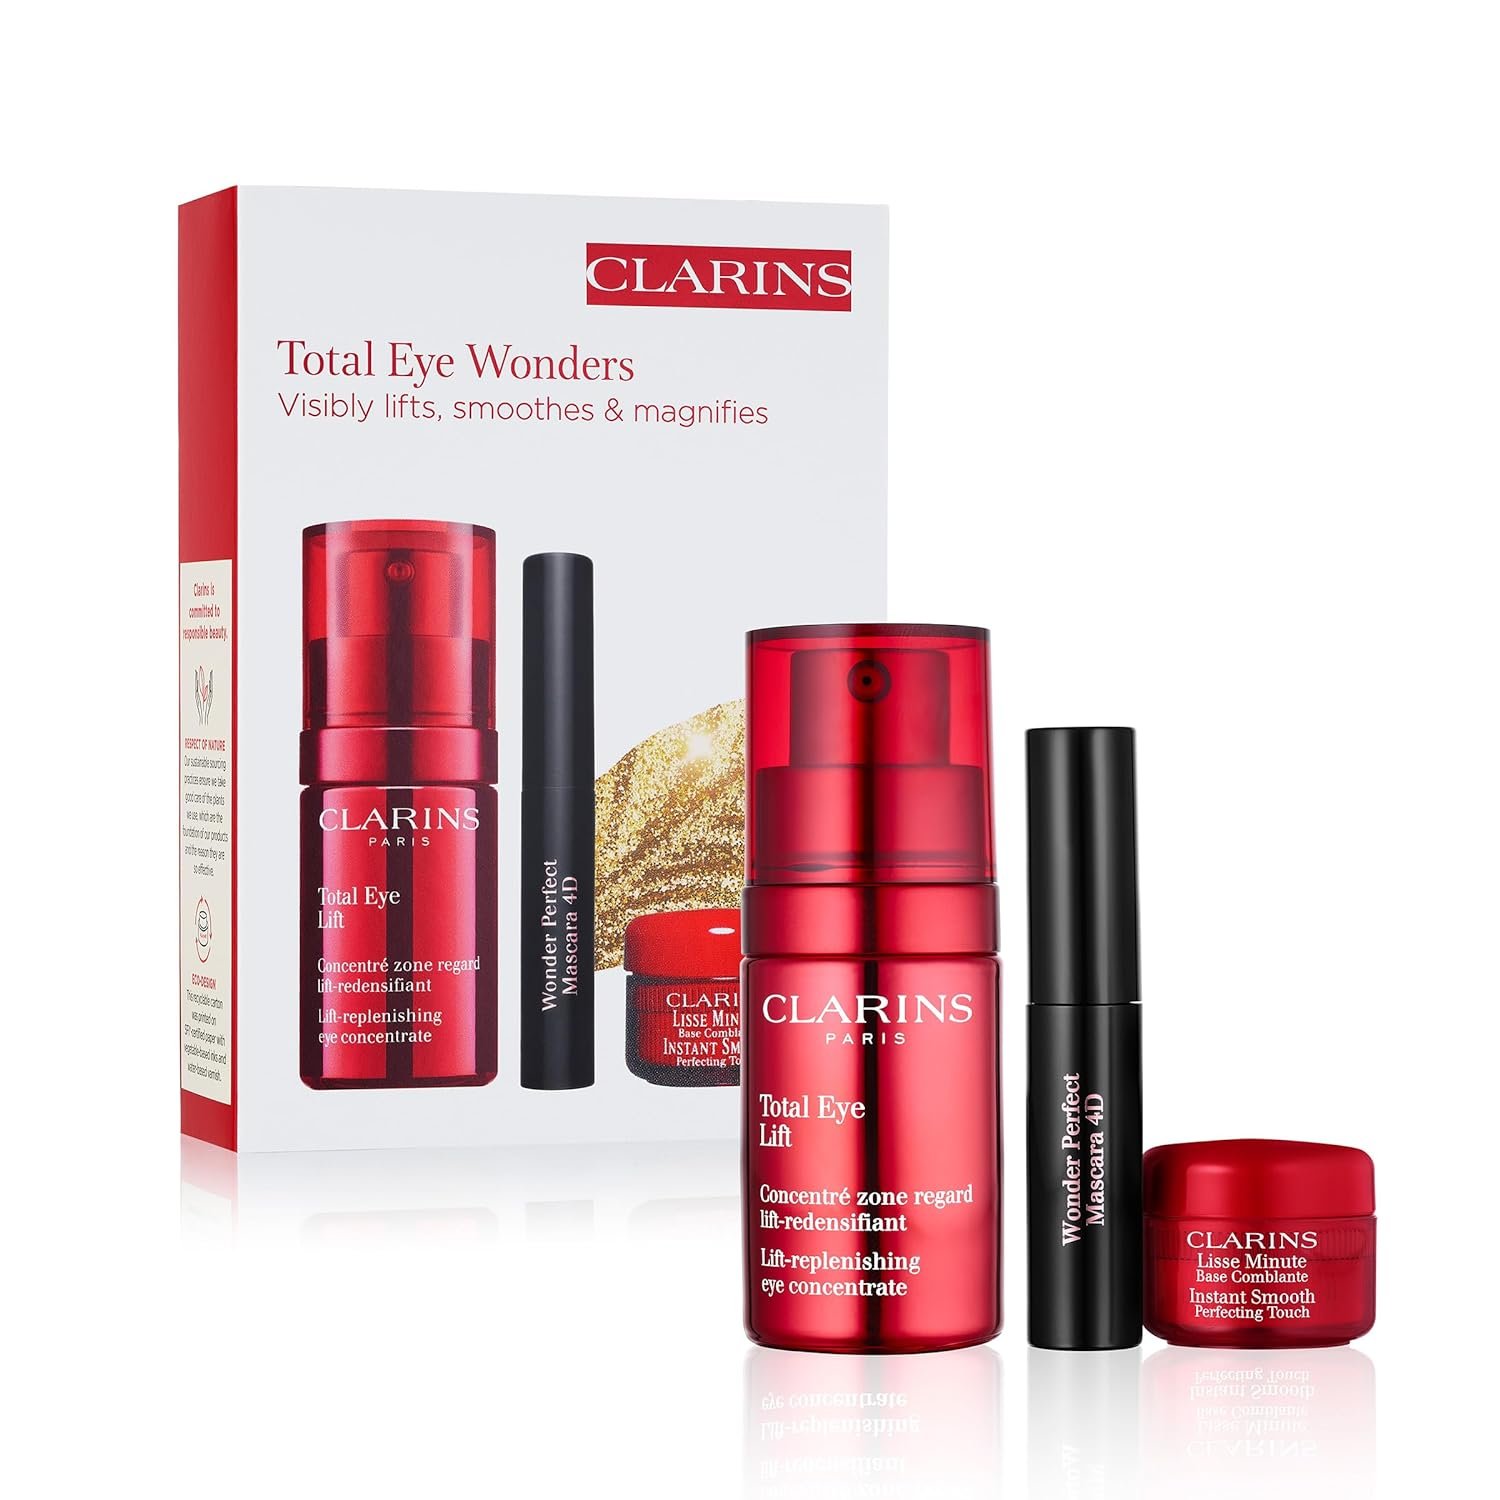 Clarins Double Serum Eye | Anti-Aging Eye Treatment | Visibly Smoothes, Firms, Hydrates and Revitalizes For More Youthful-Looking Eyes In Just 7 Days*